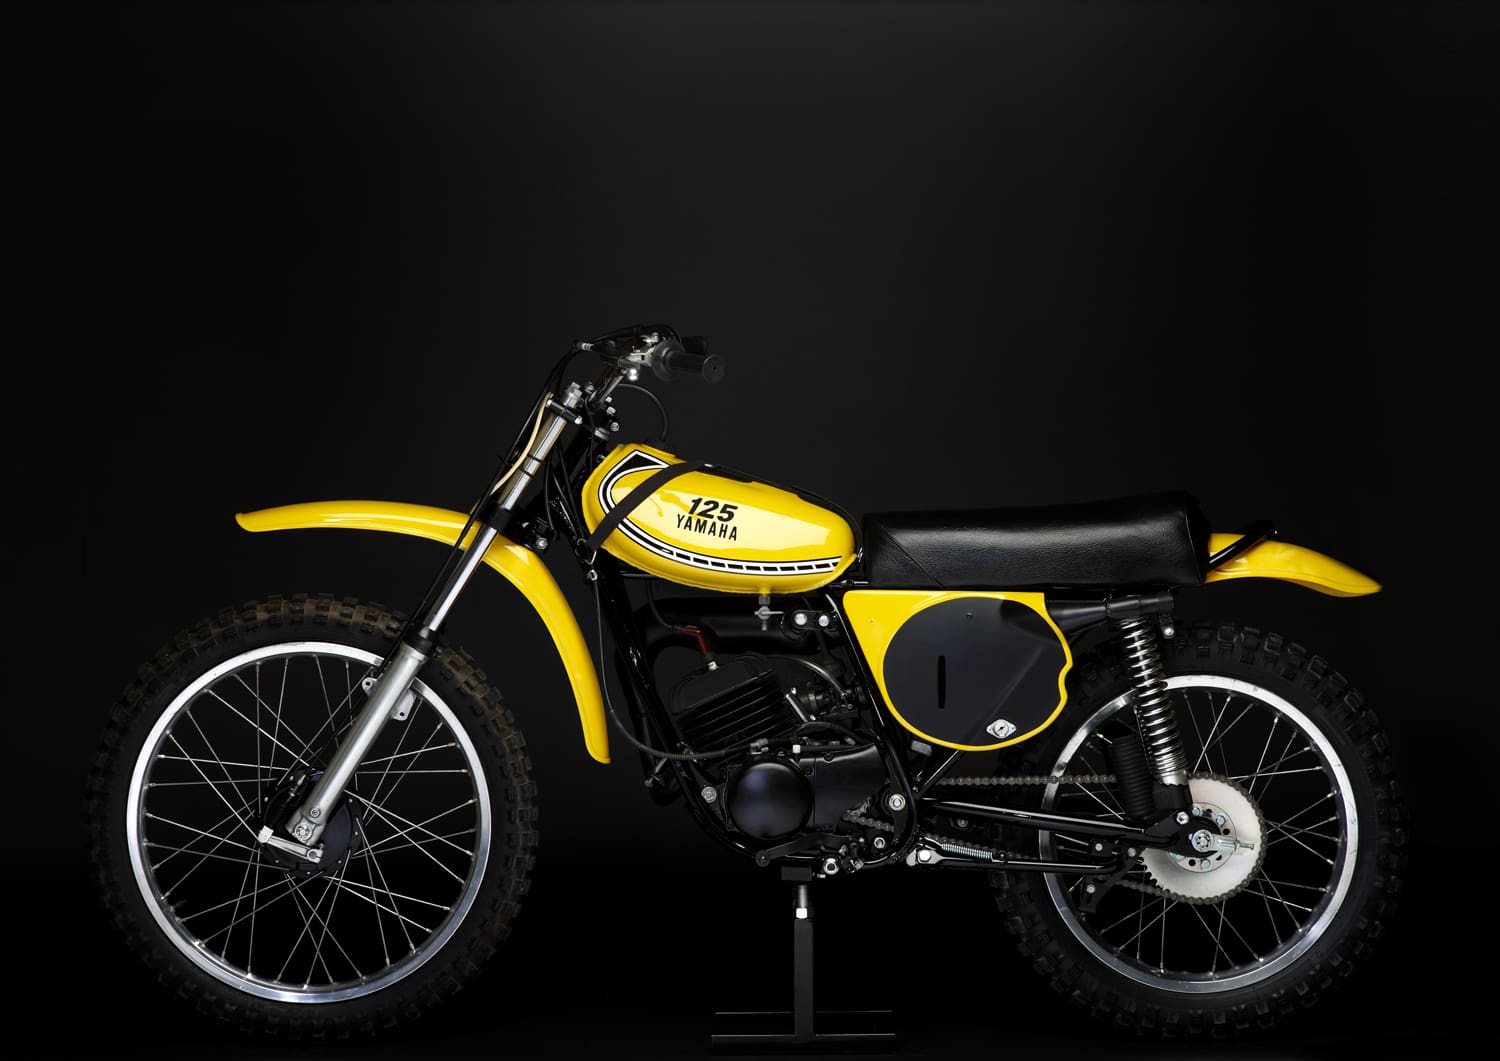 A yellow dirt bike on a black background.